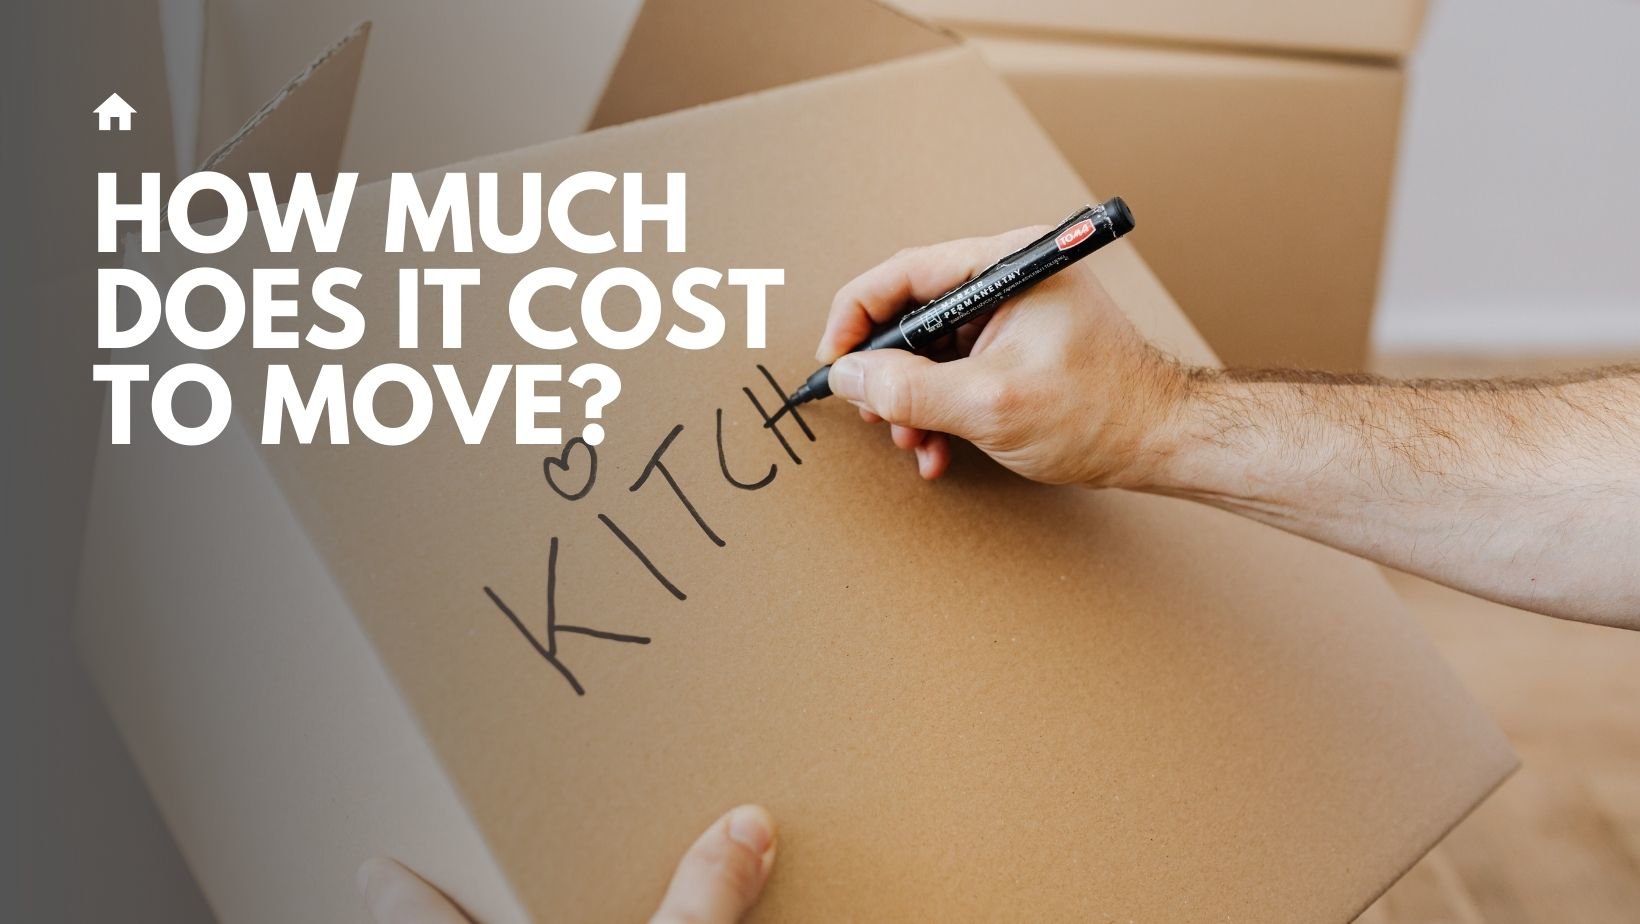 How much does moving cost